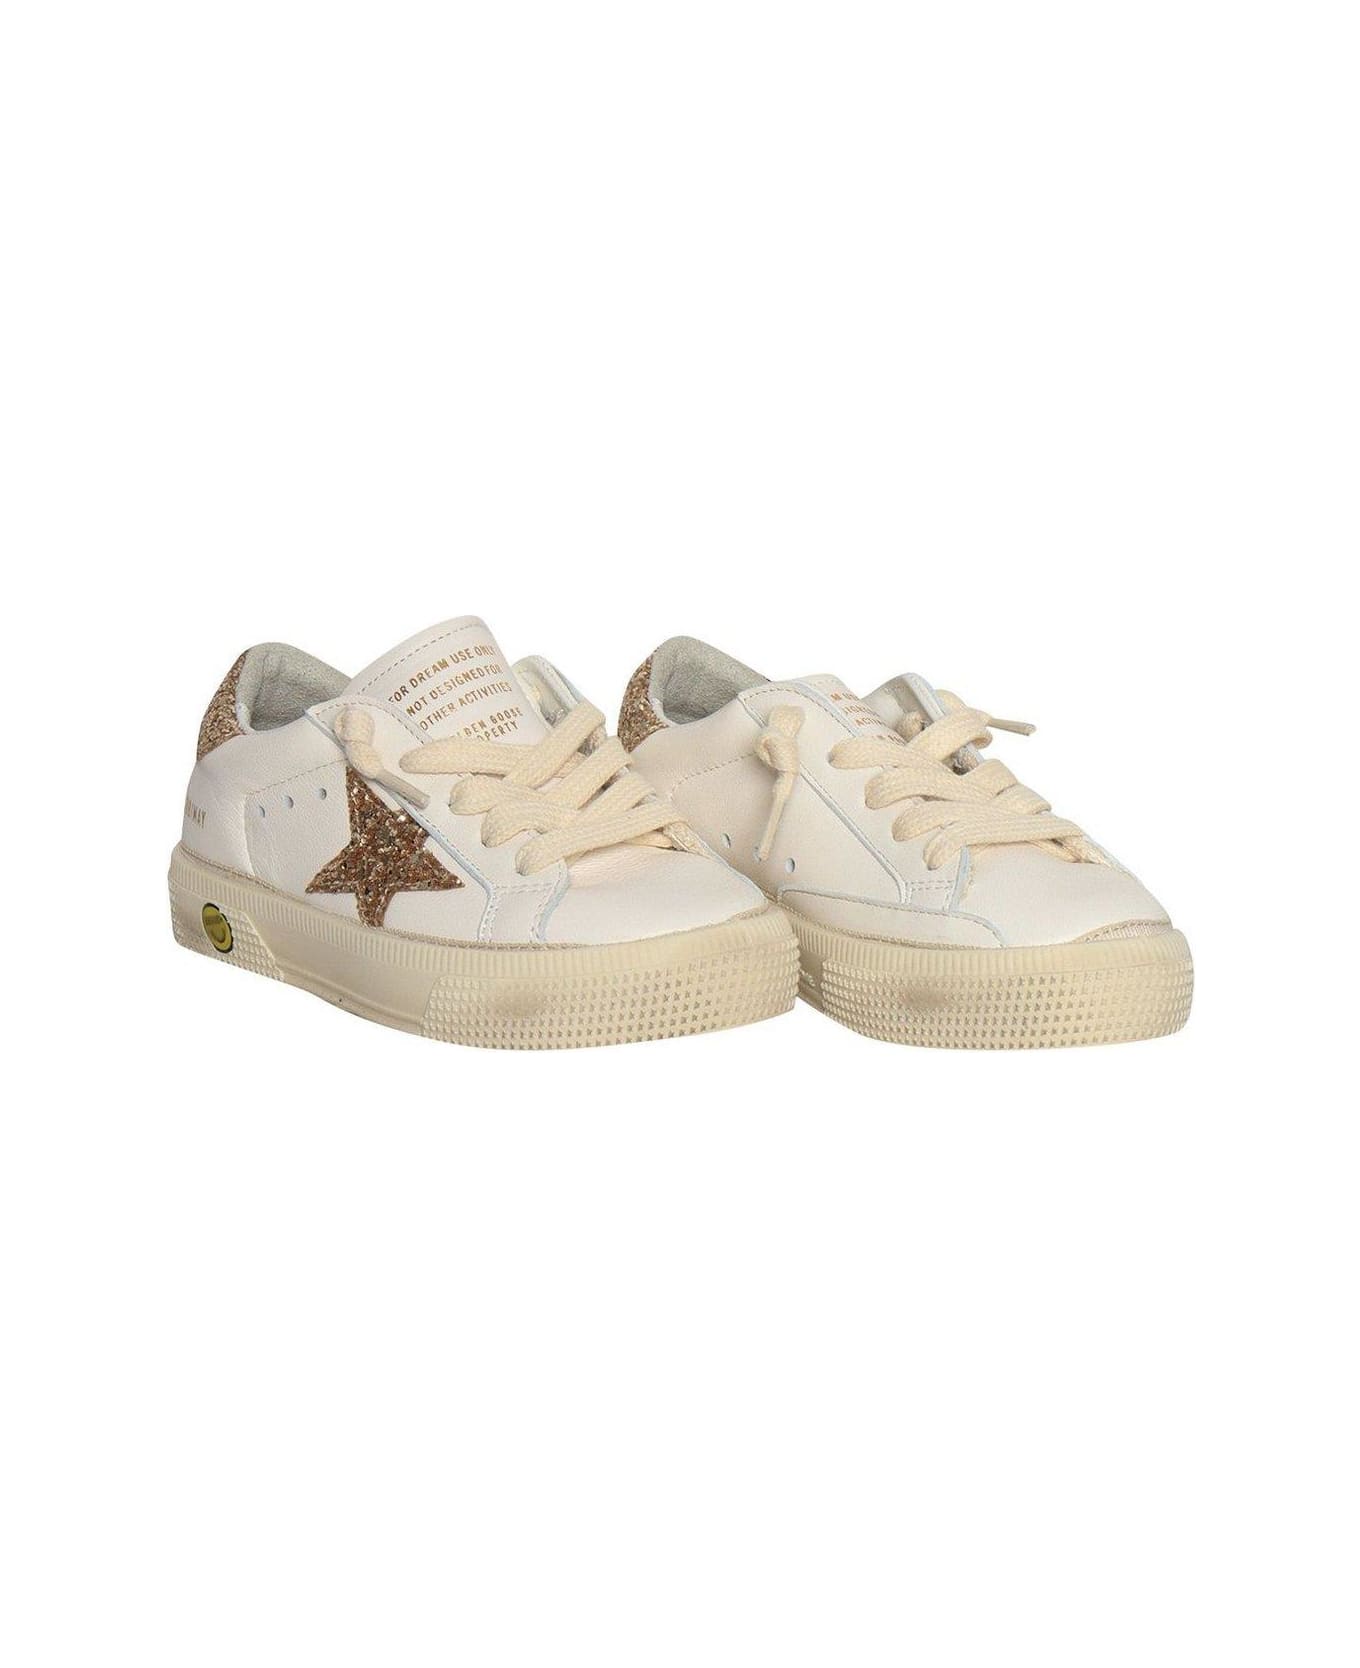 Golden Goose May Star Distressed Low-top Sneakers - White Gold シューズ